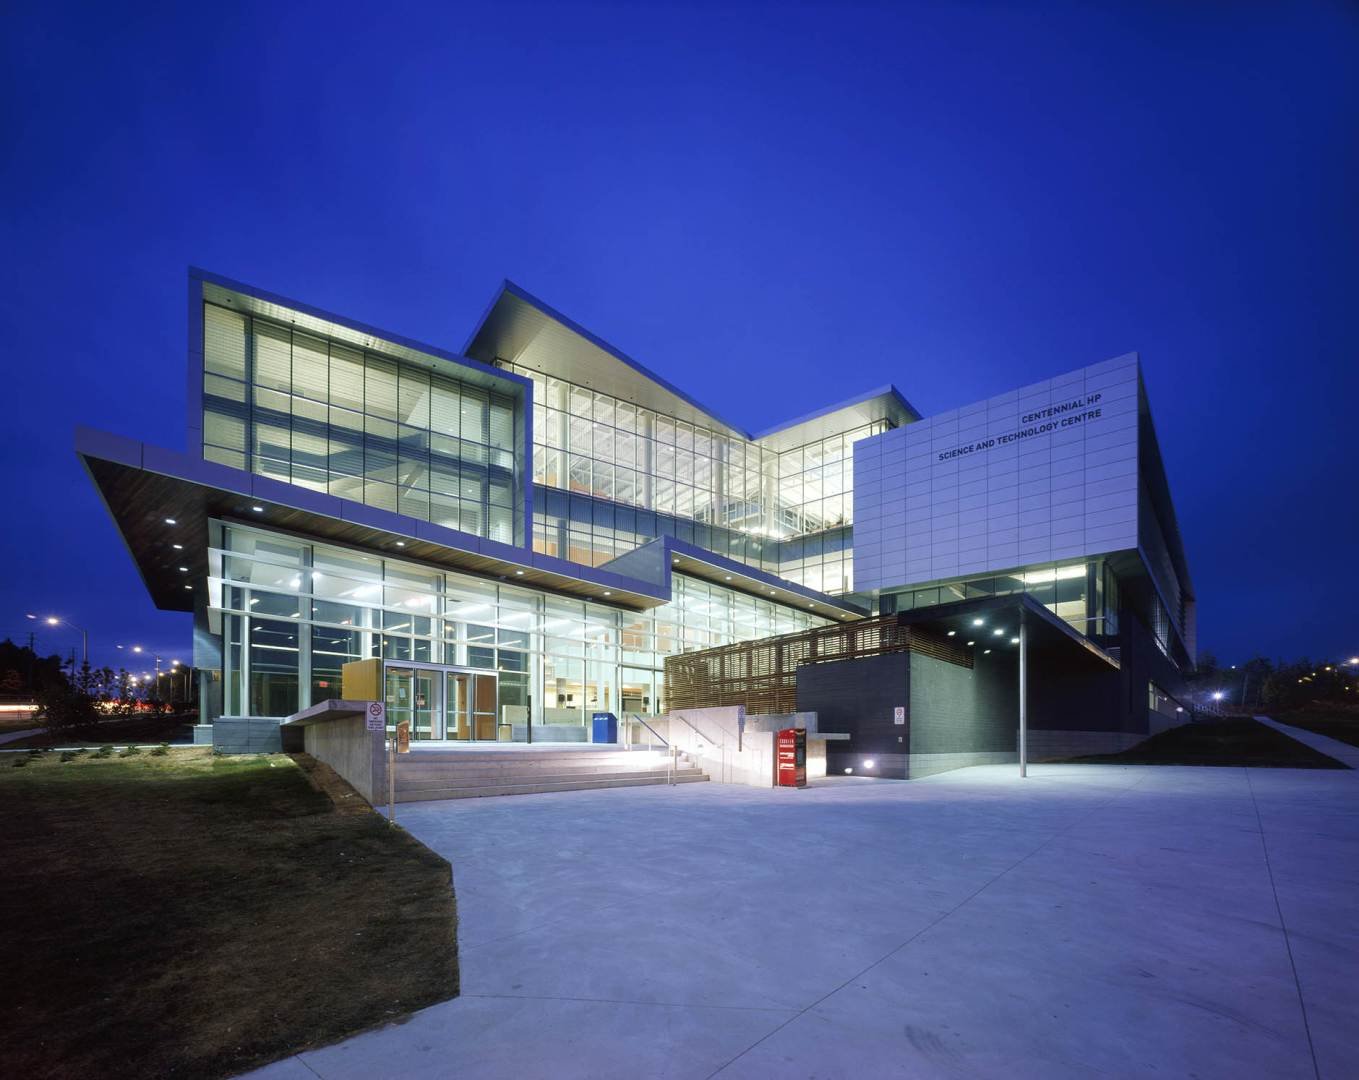 HP Centennial Science and Technology Centre